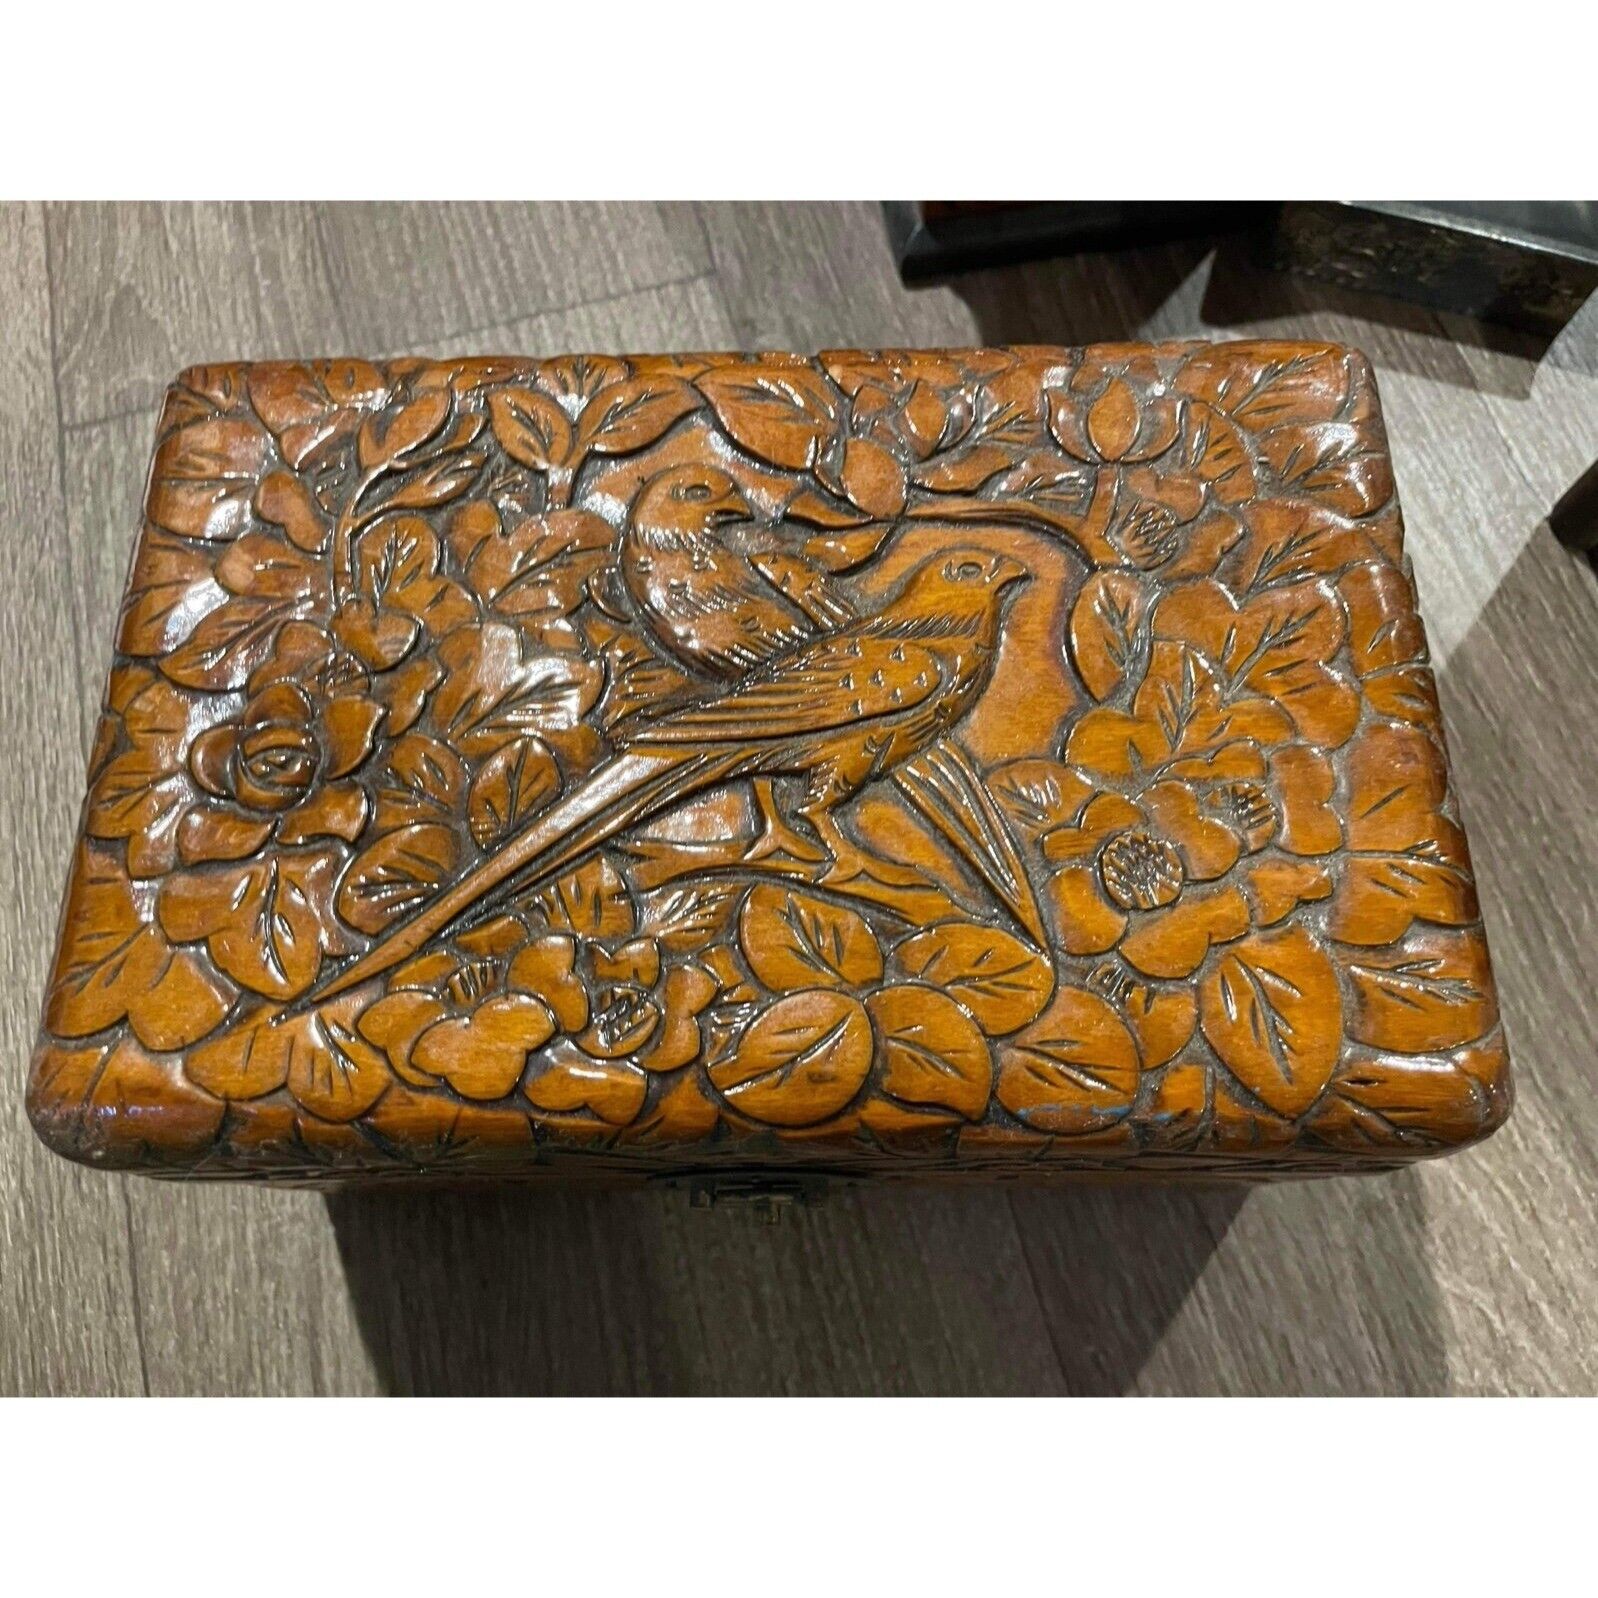 Wooden Box Hand Carved Birds Flowers Wood Treasure Chest 8.5x5.5 in Hinged Boho